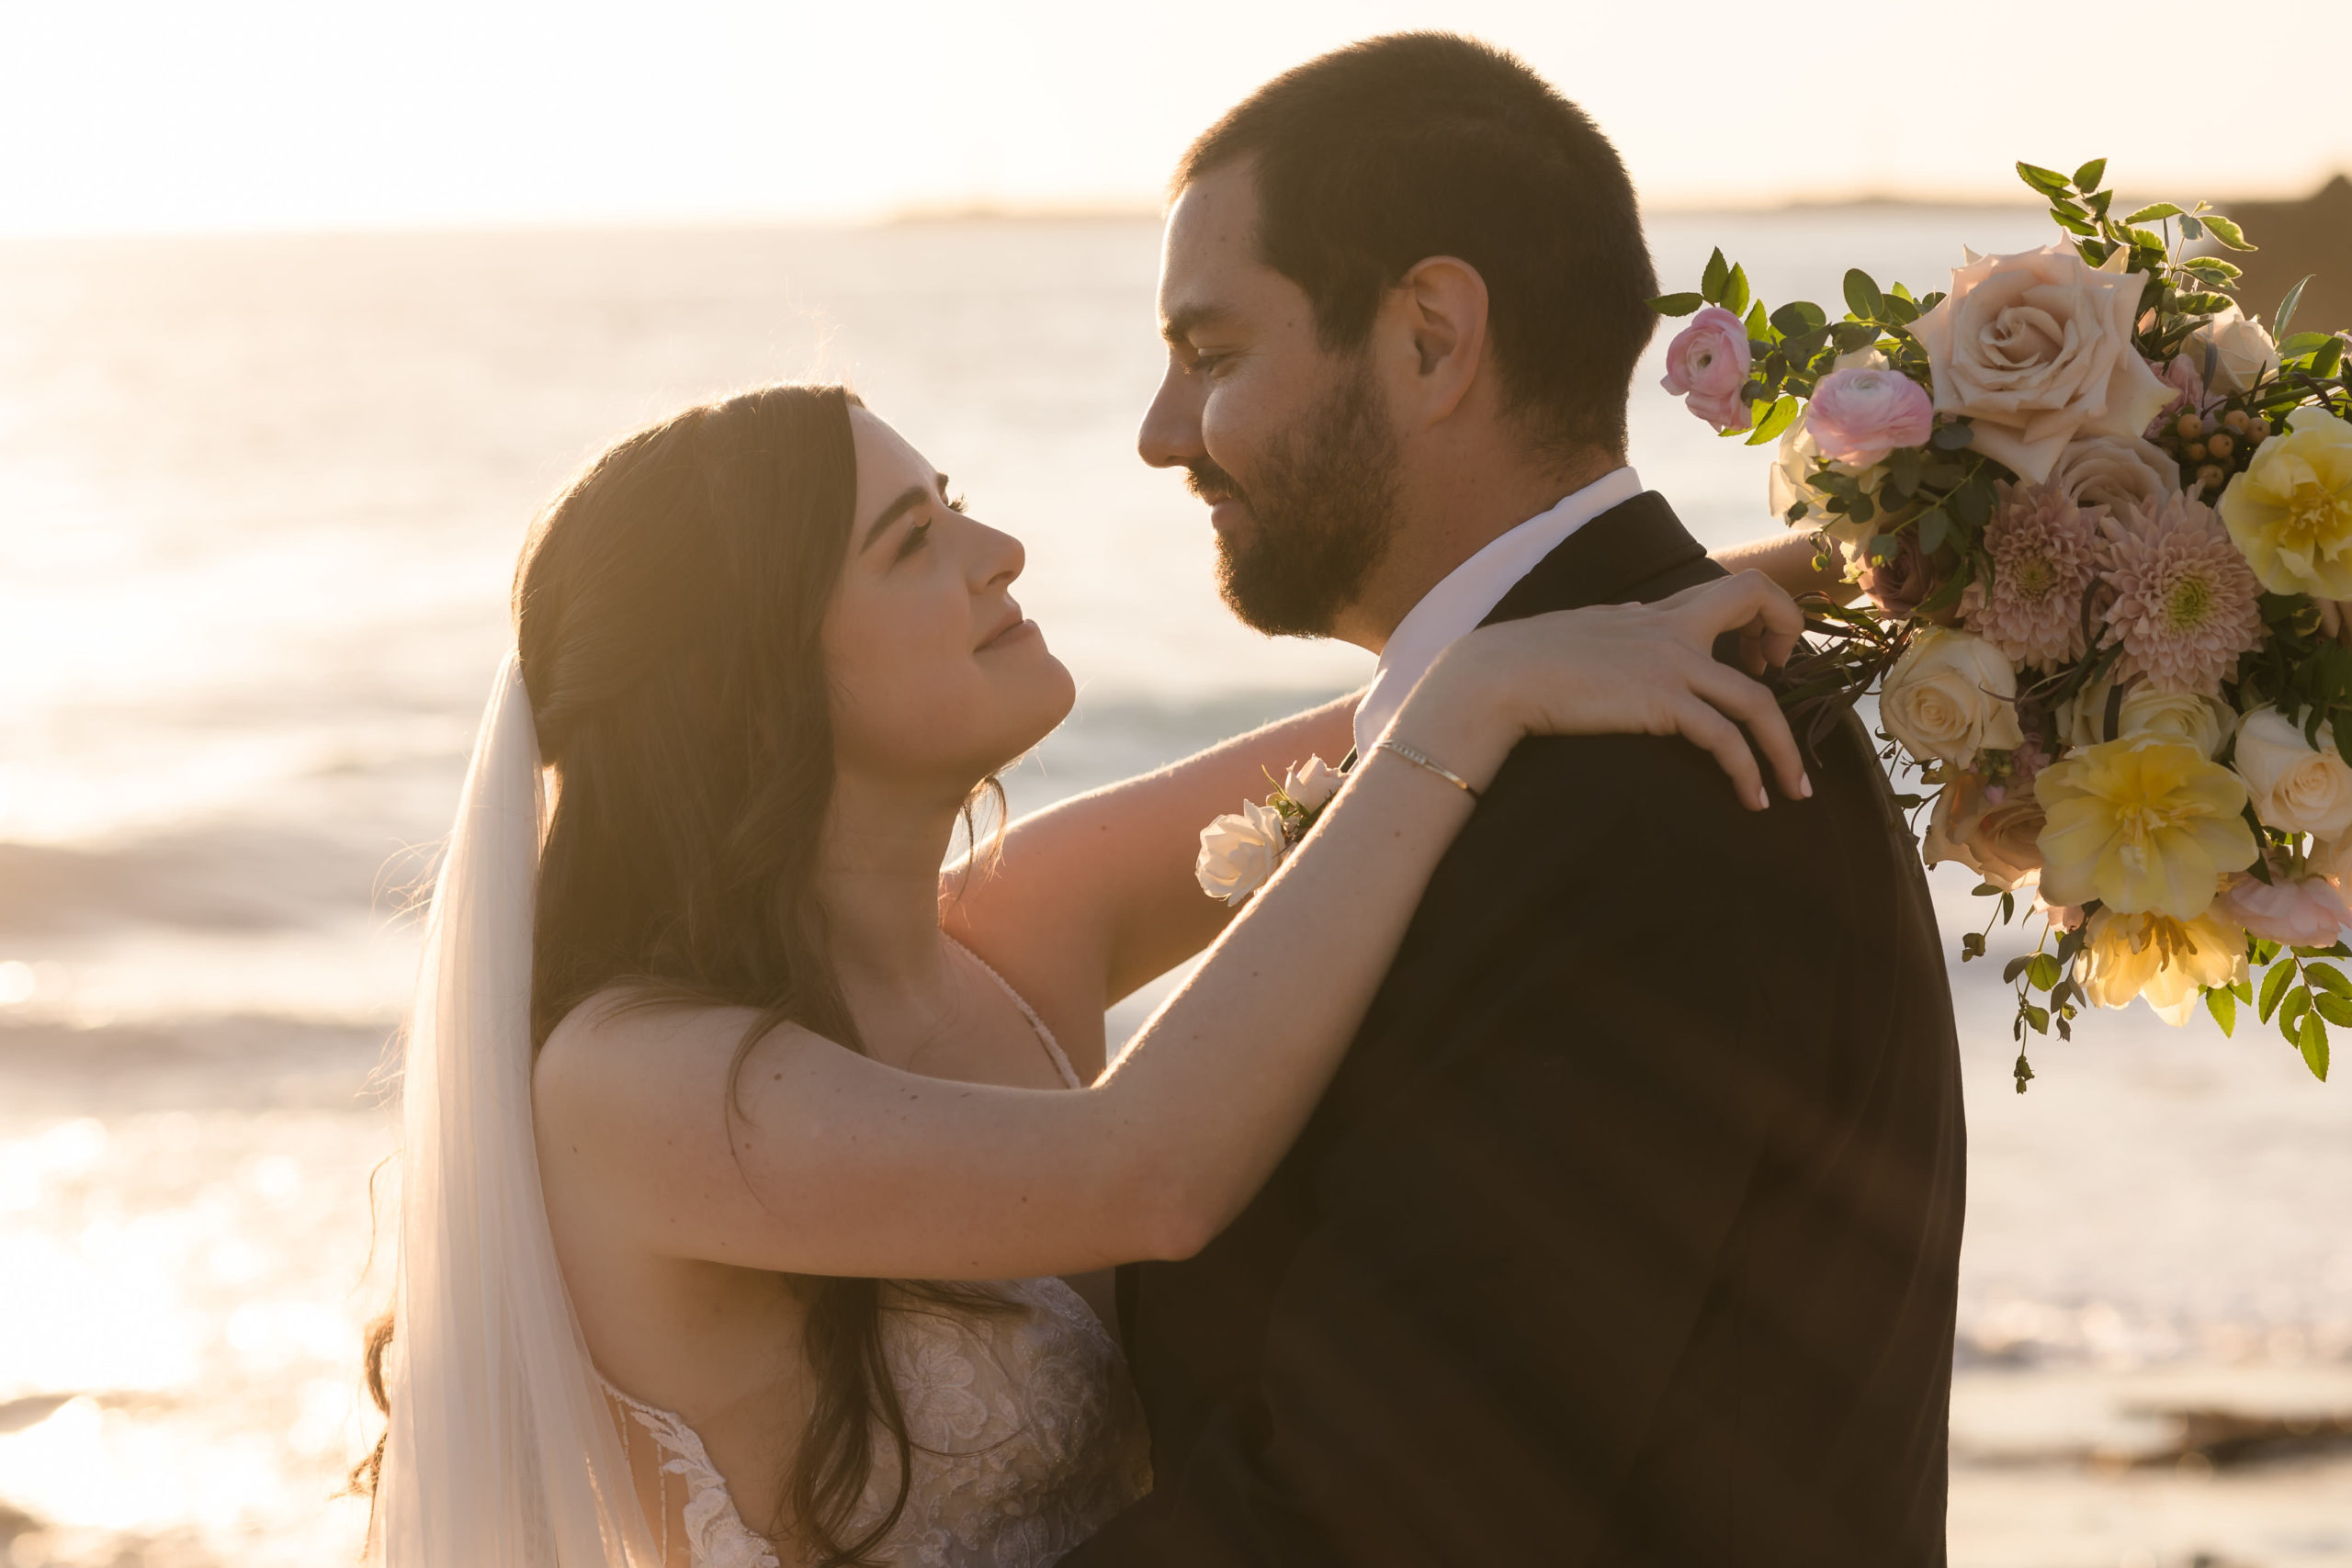 The Top 8 Beach Wedding Venues In Orange County, CA. Newlywed couple sharing an embrace on the beach during golden hour.